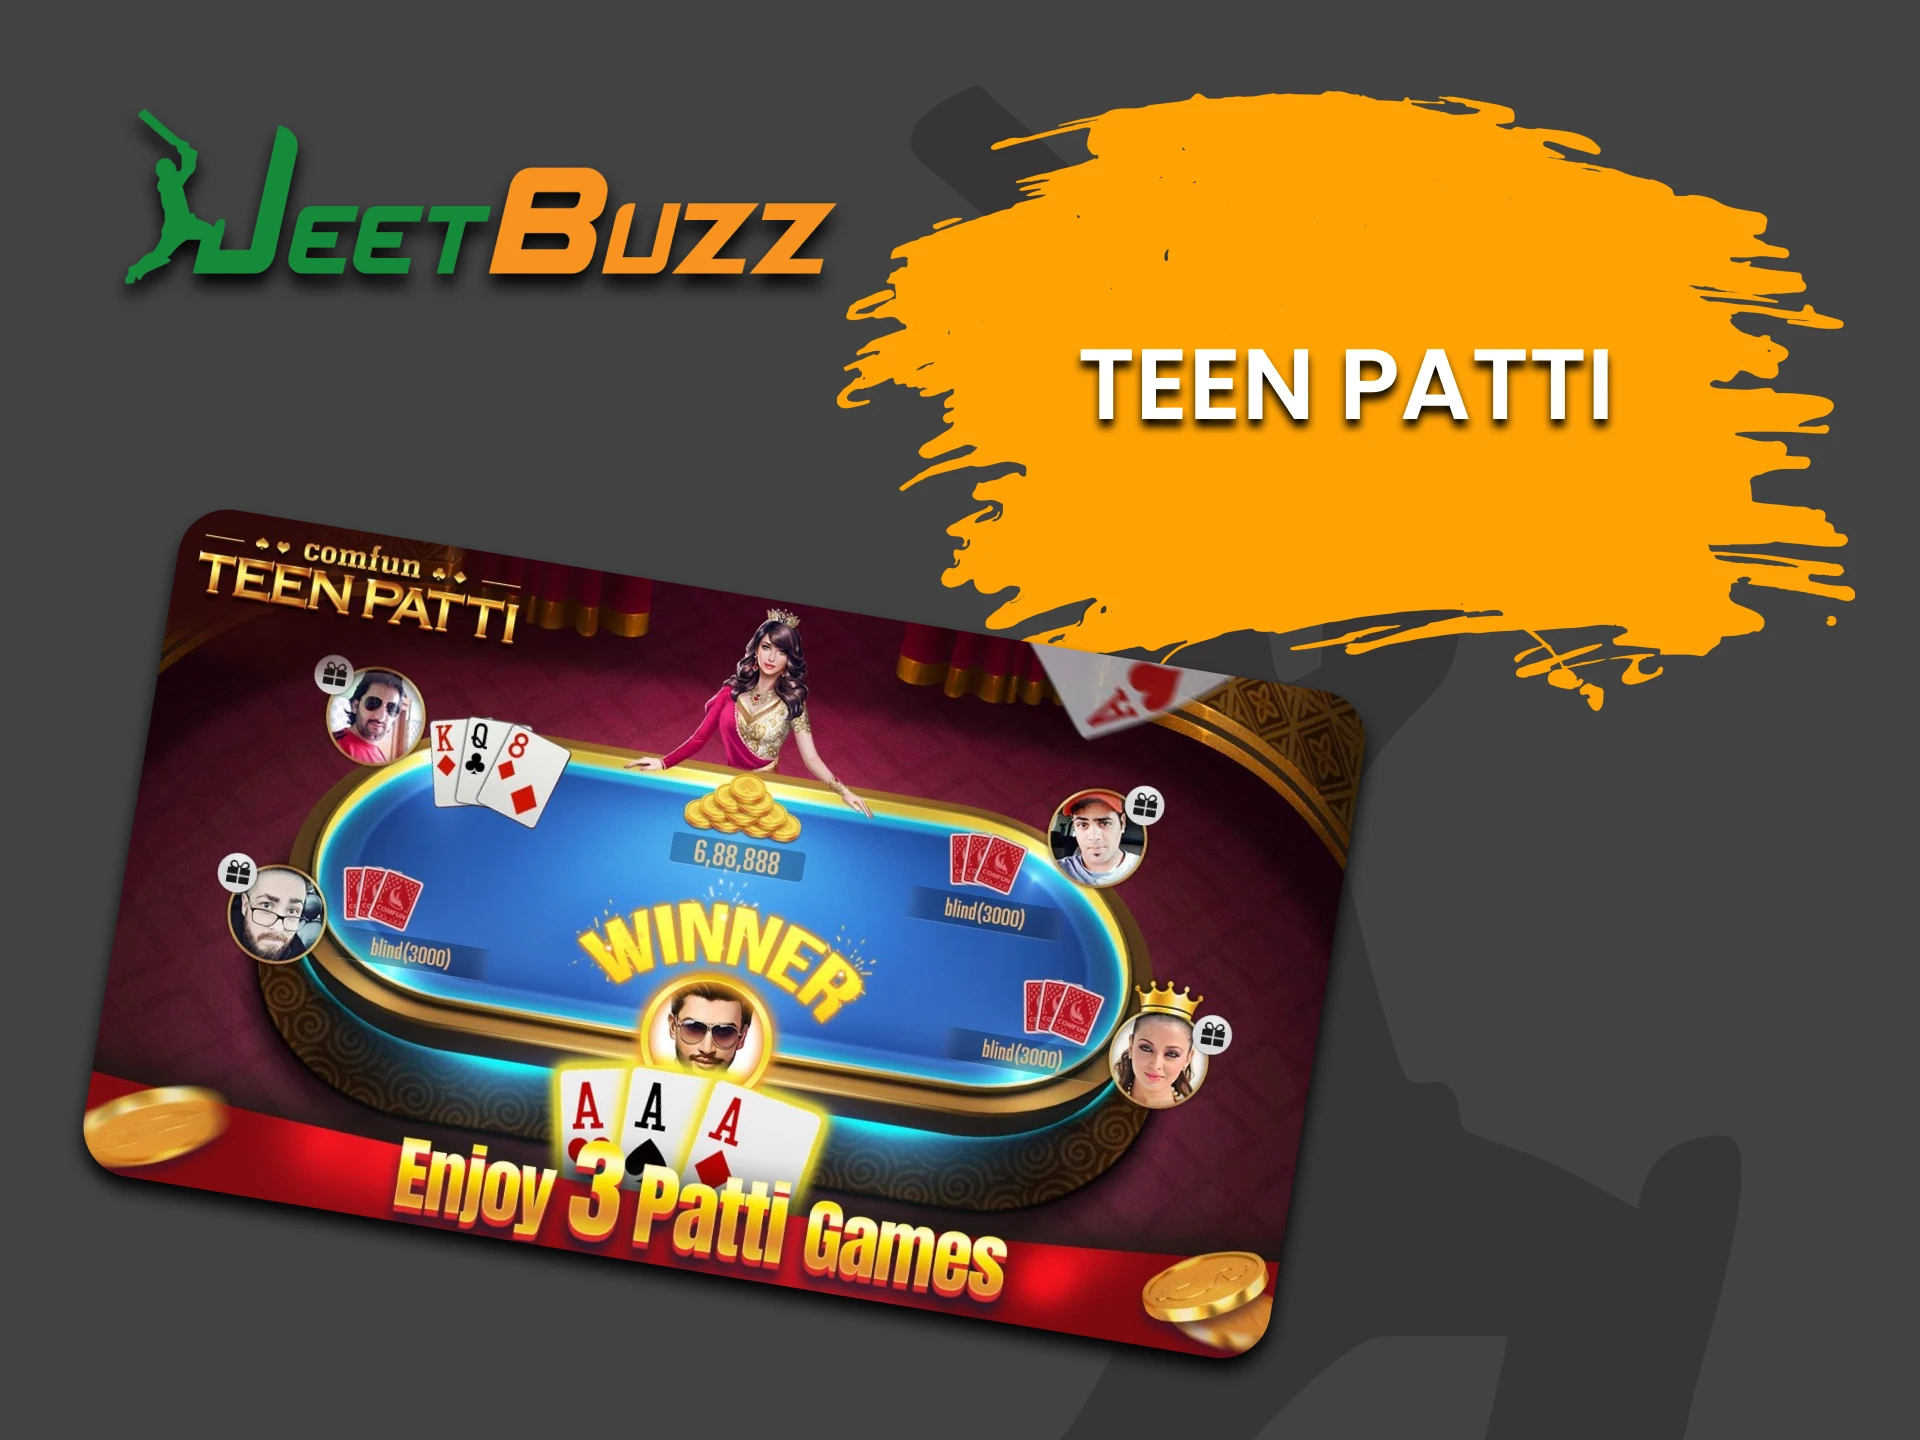 For table games from JeetBuzz, choose Teen Patti.